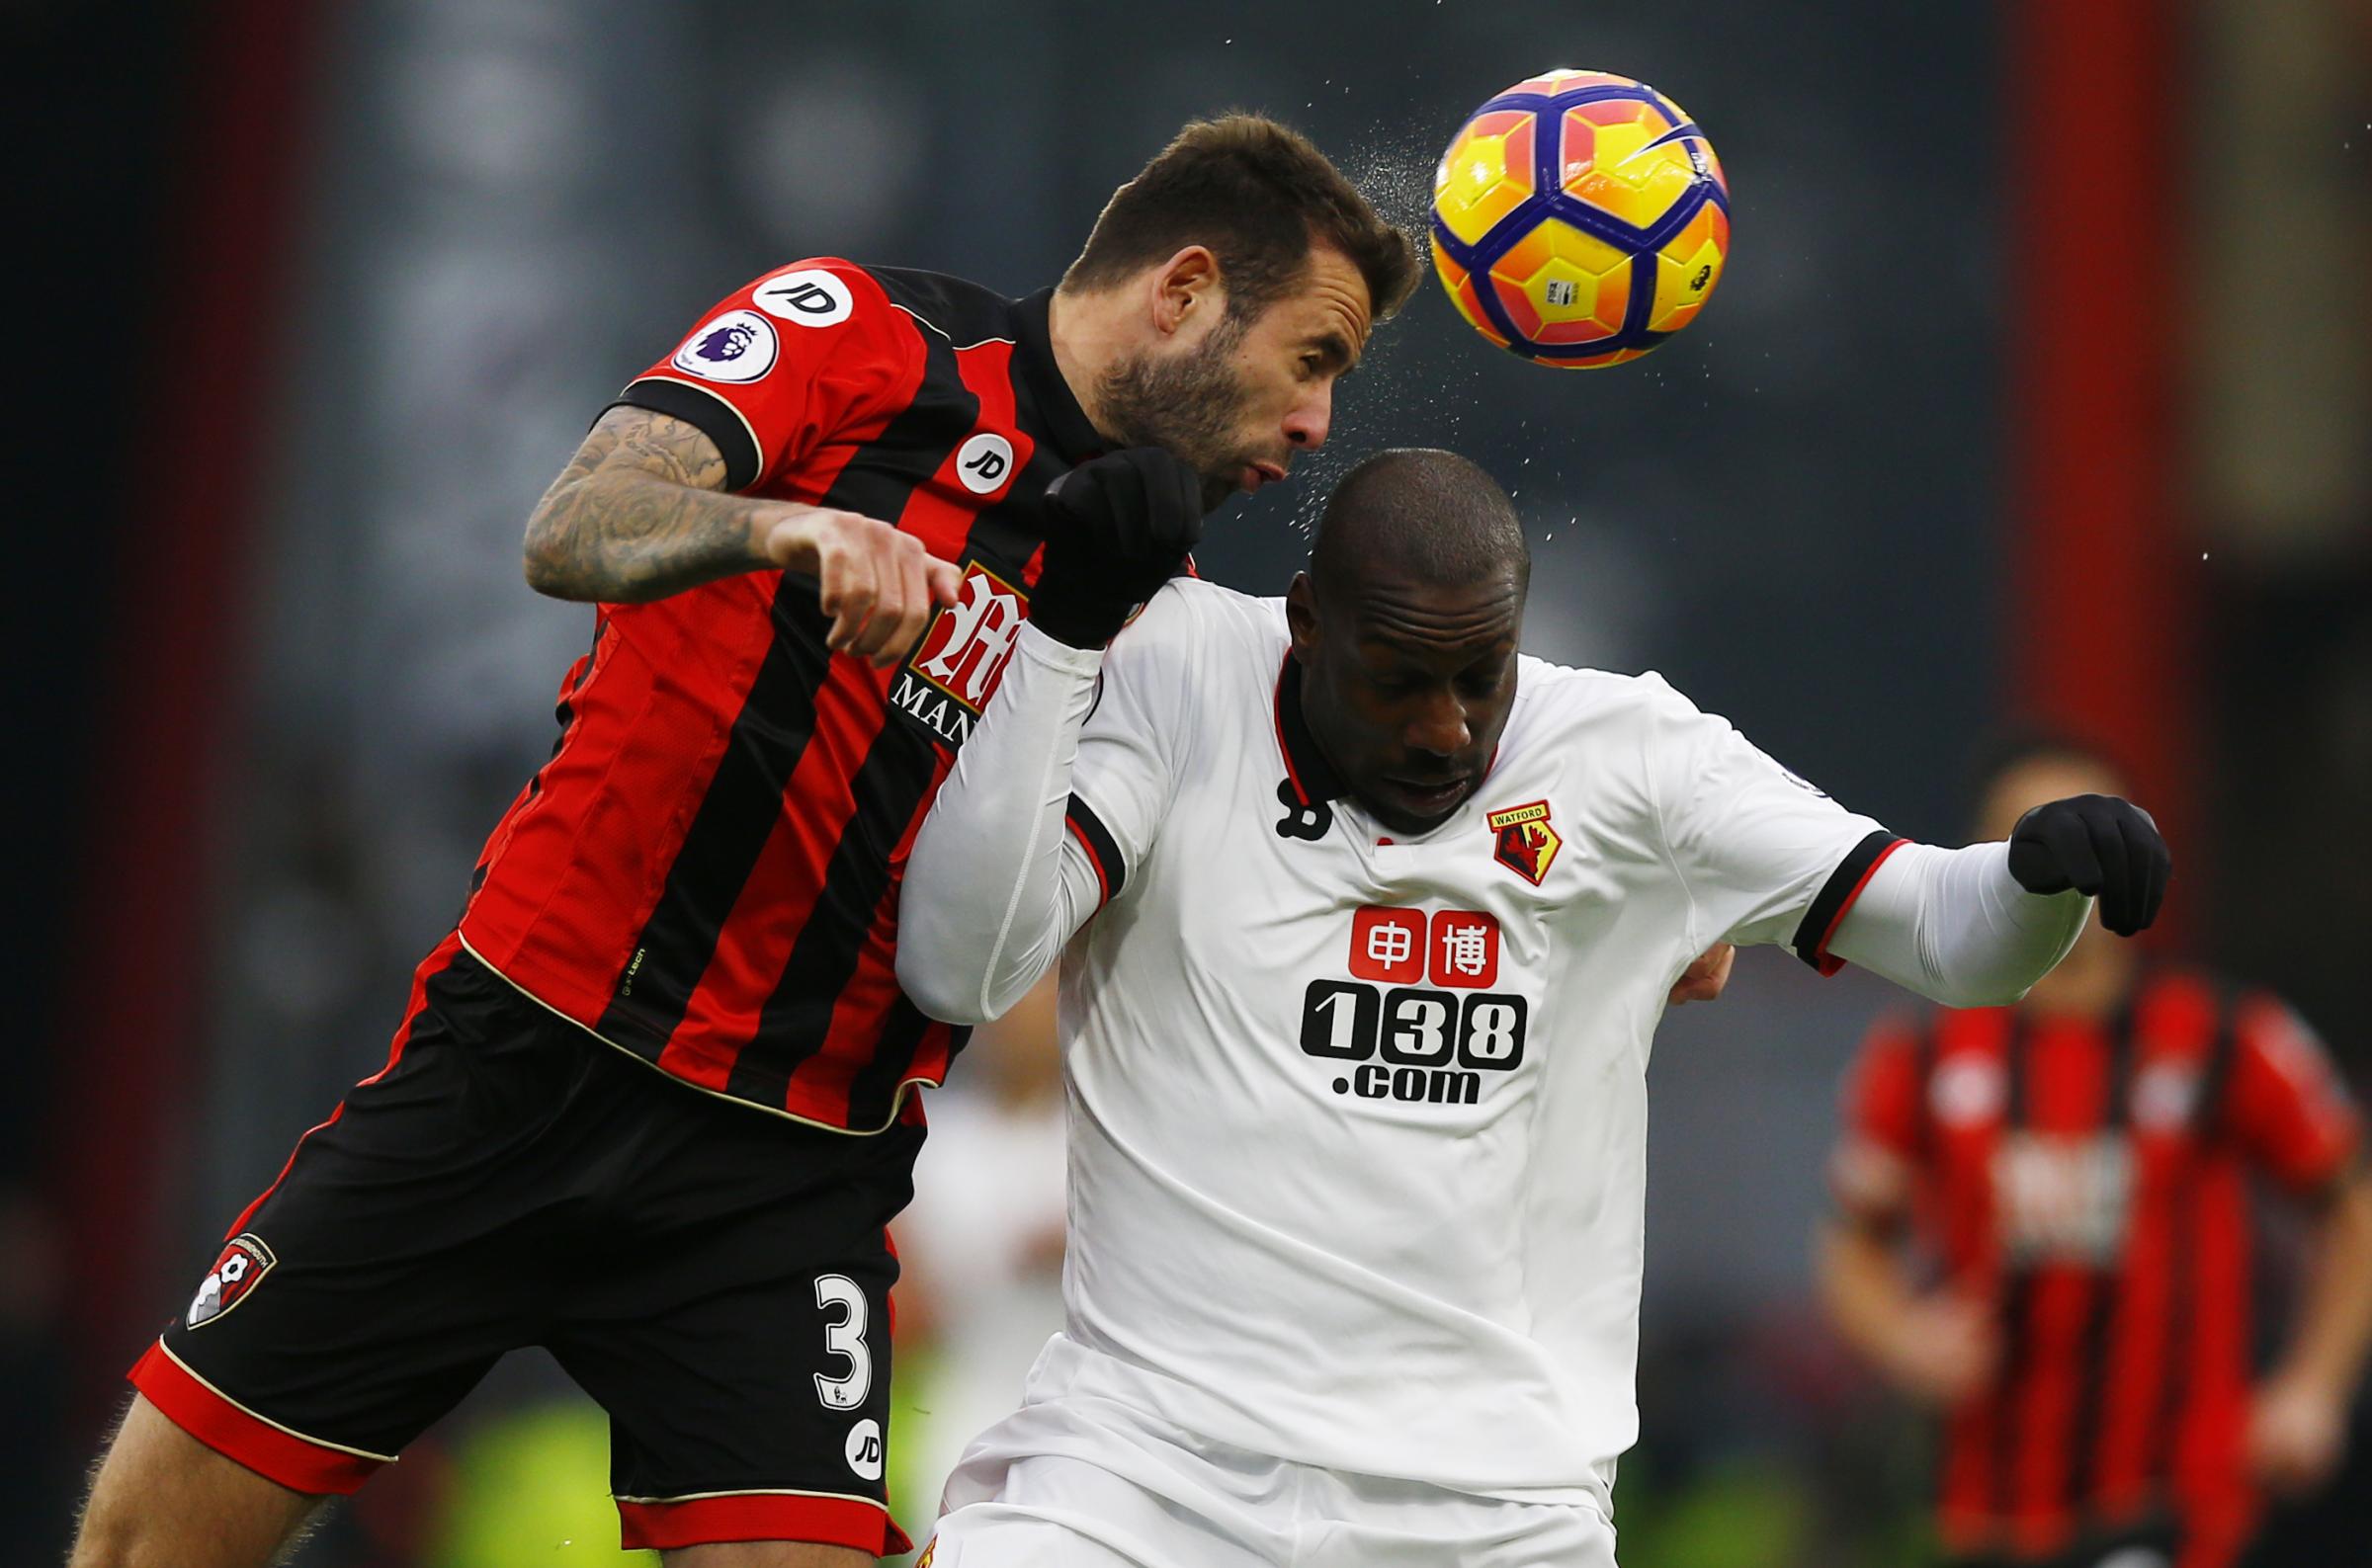 Bournemouth defender linked with Hornets - Harrow Times